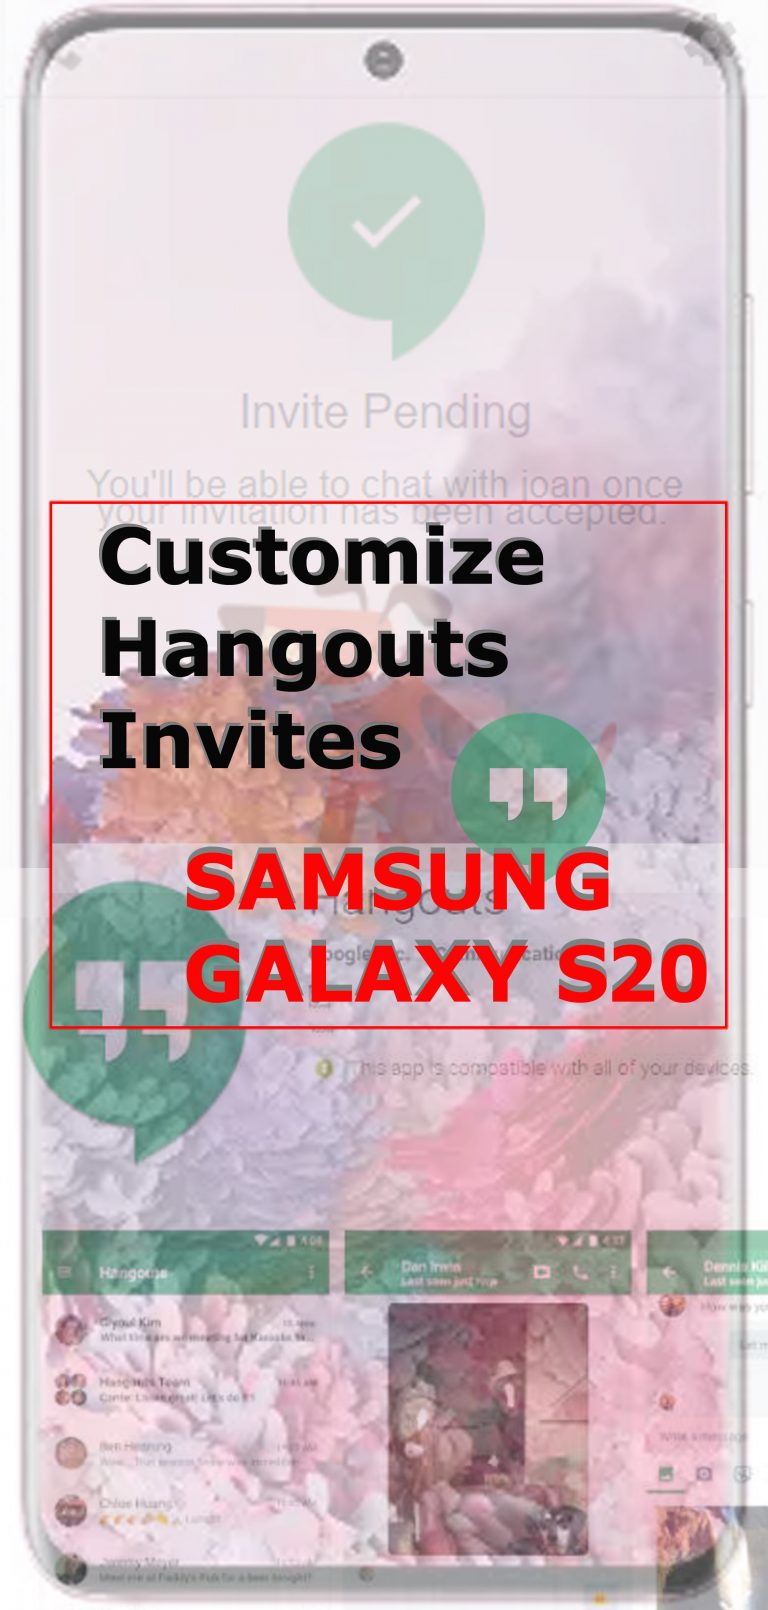 How to Customize Hangouts Invites on Galaxy S20